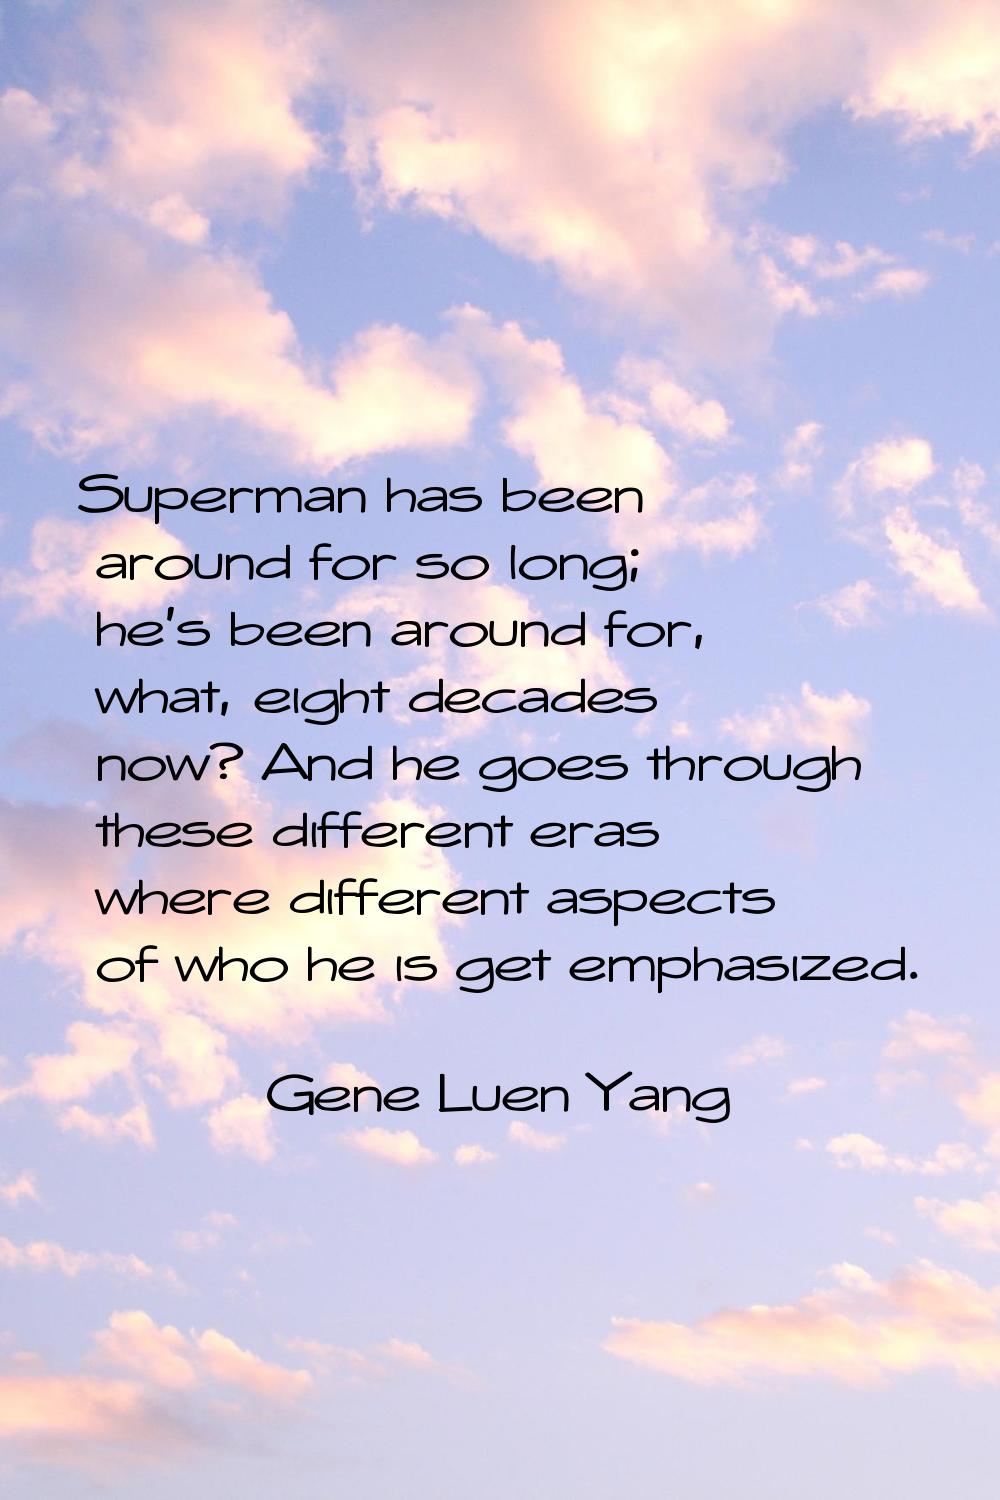 Superman has been around for so long; he's been around for, what, eight decades now? And he goes th